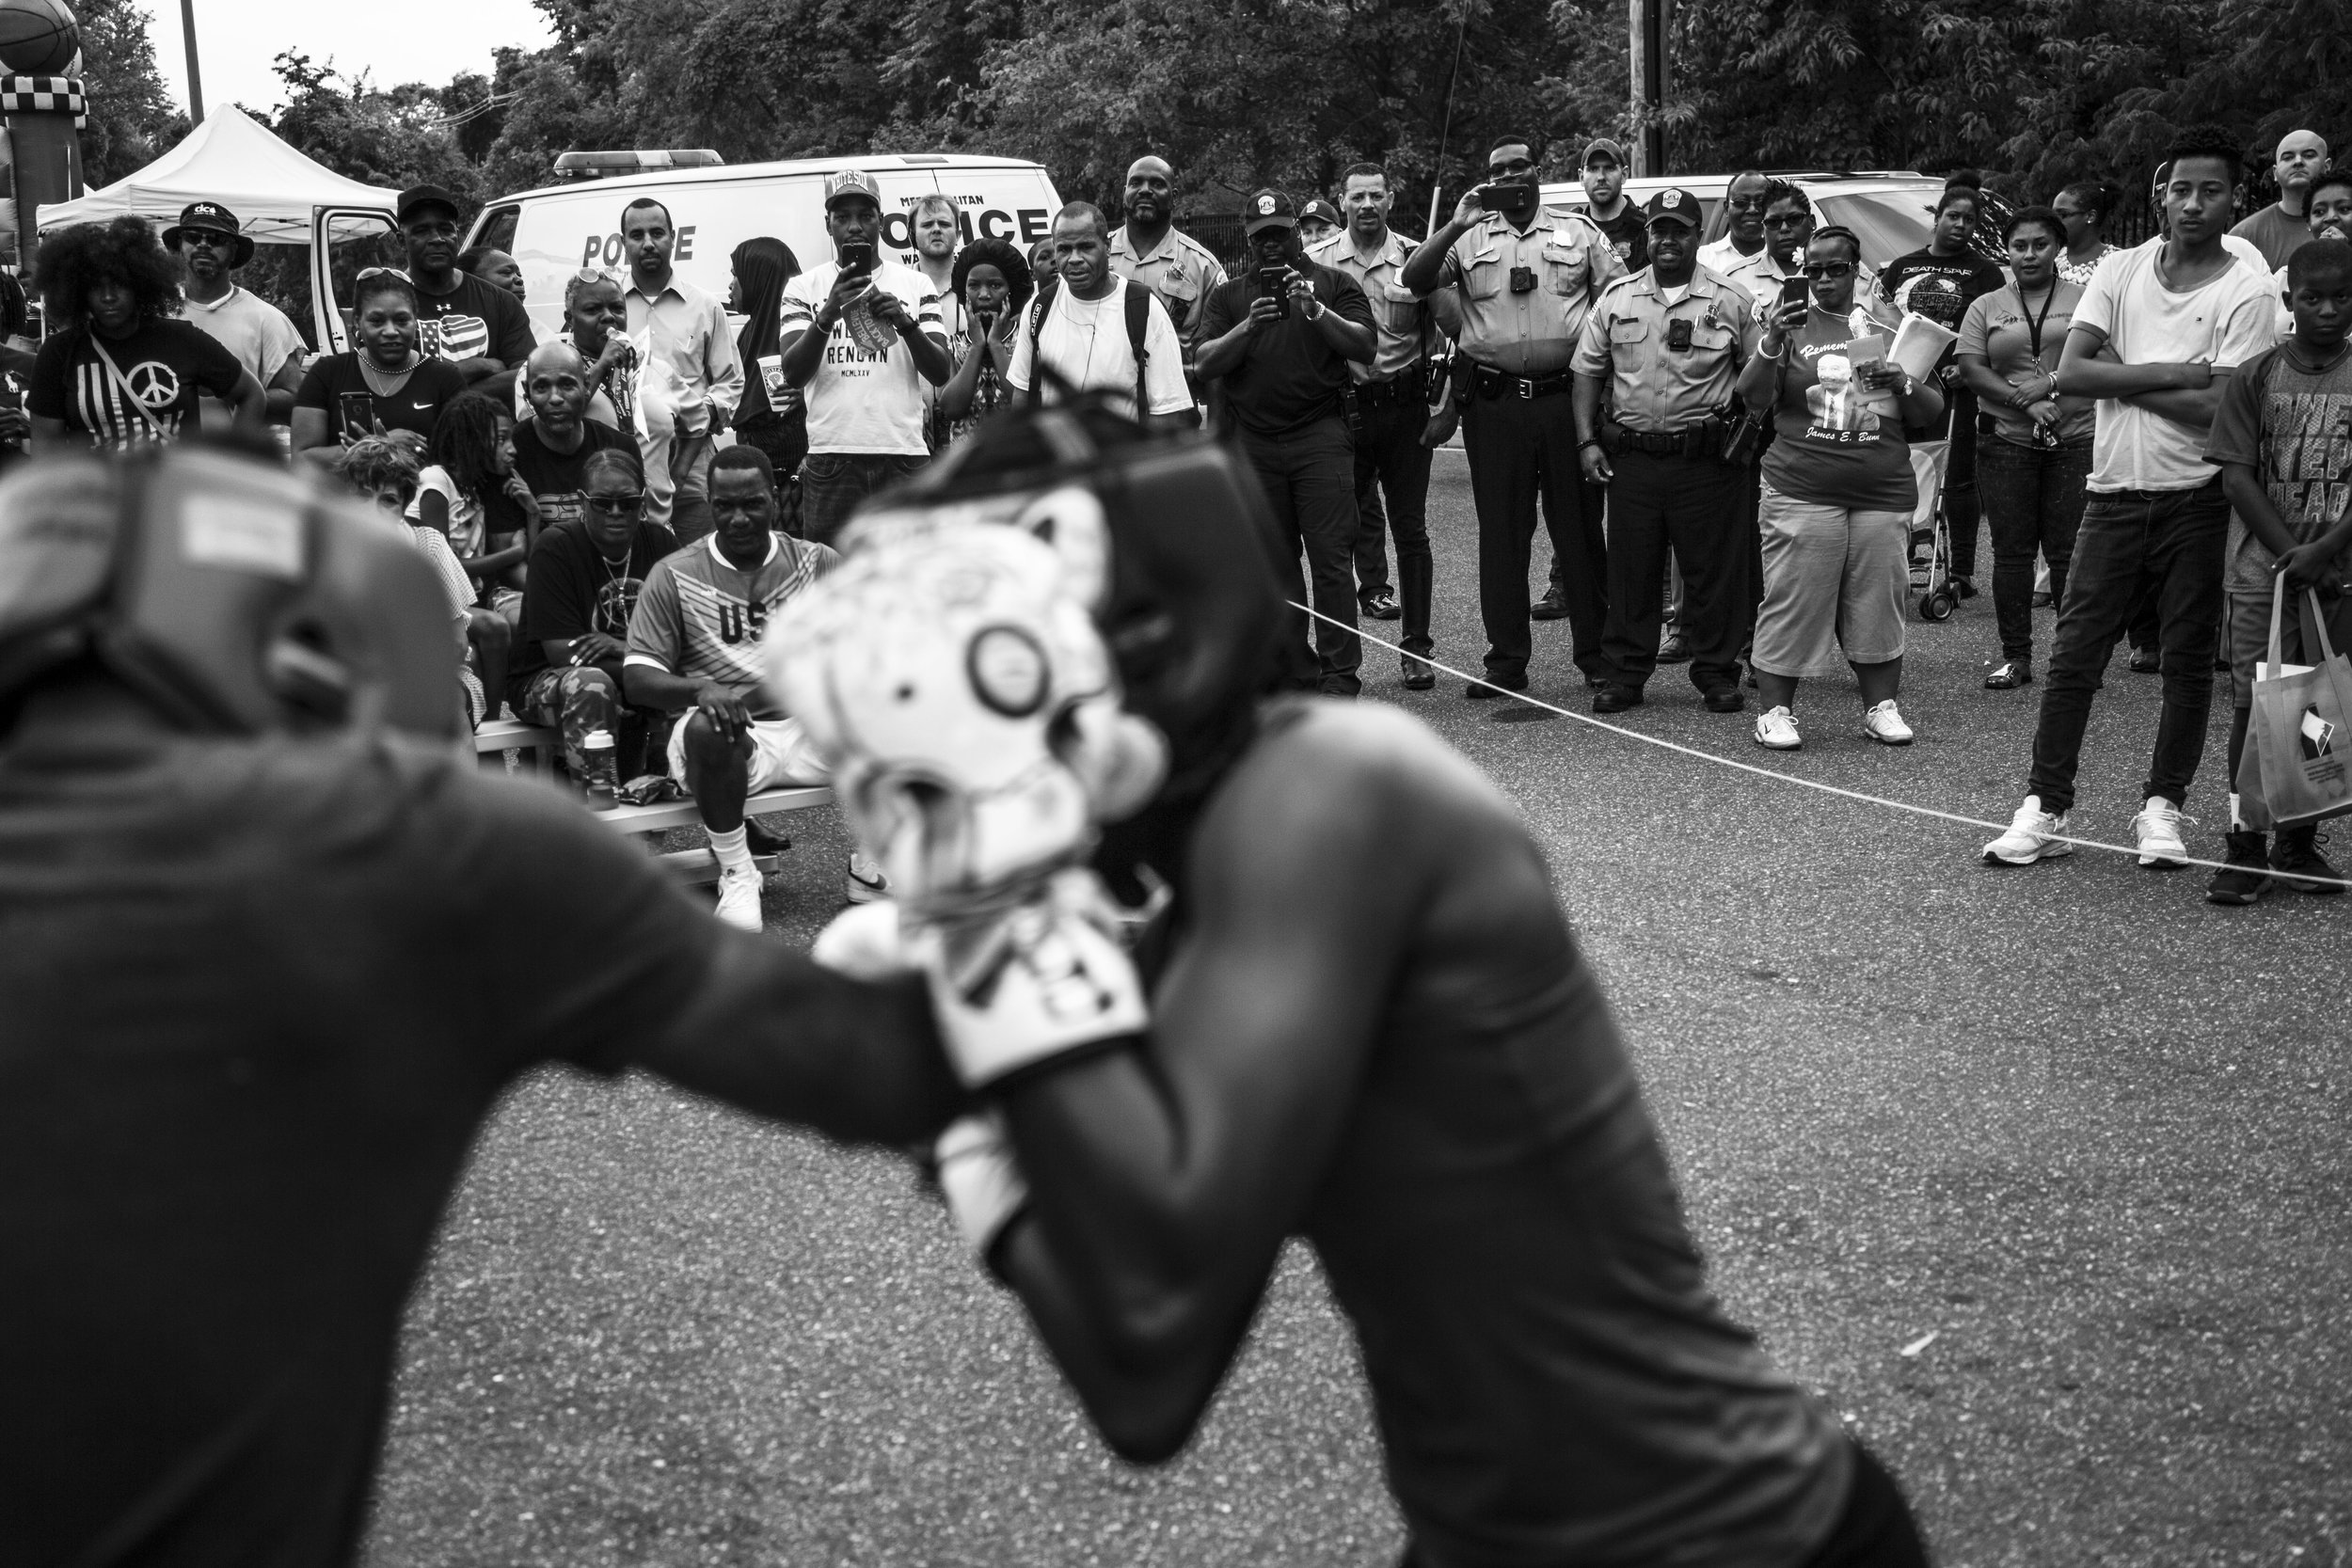   Tiara spars against a teammate in an exhibition fight during the Metropolitan Police Dept.’s National Night Out, an event that promotes police-community bonding.  